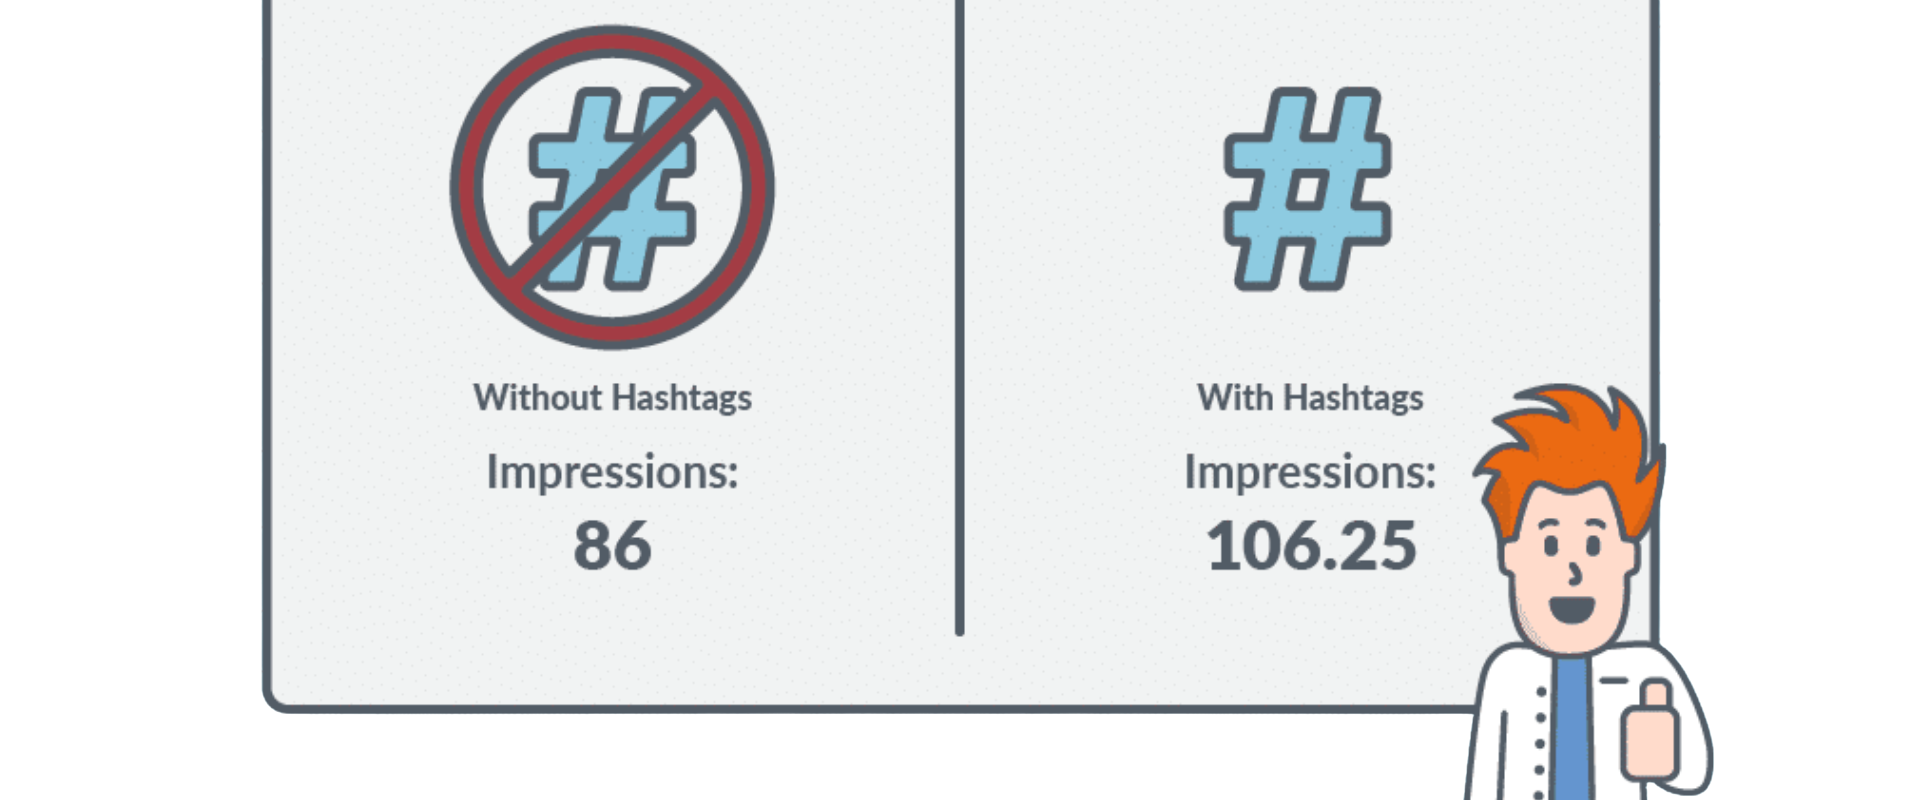 A screenshot of a social media post with and without hashtags to illustrate the difference in reach.